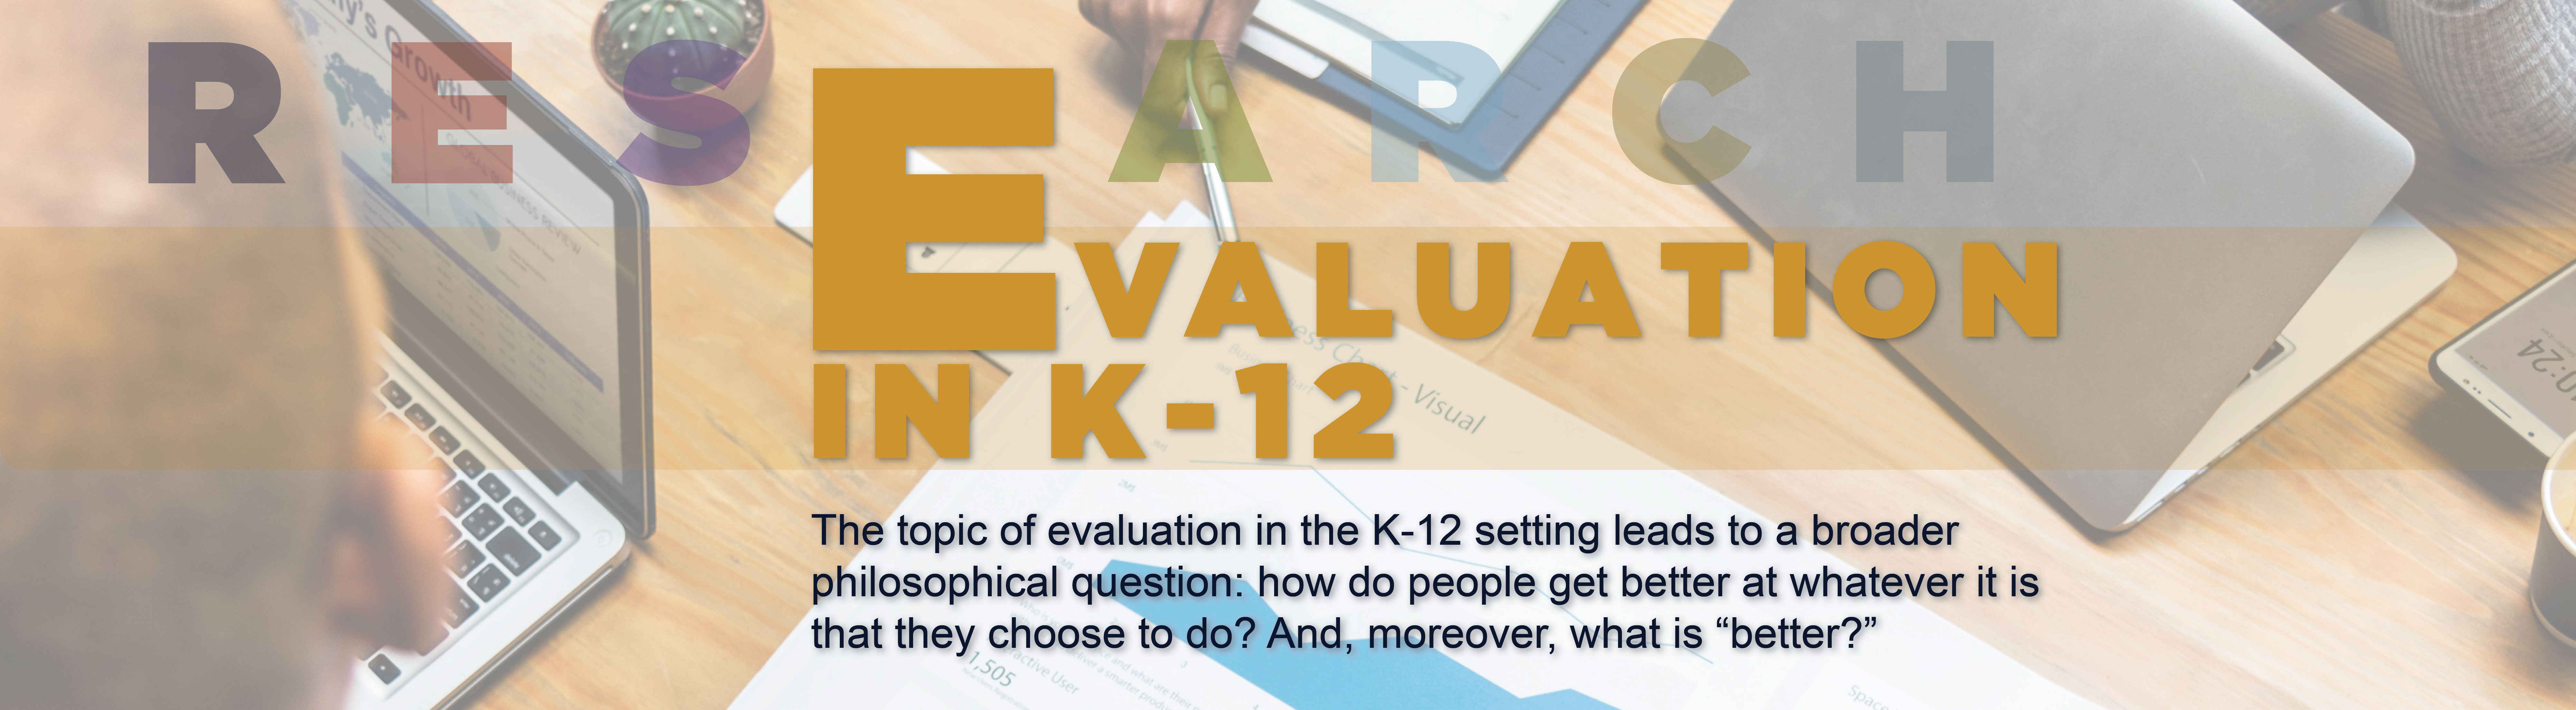 Laptop showing Evaluation in K-12: The topic of evaluation in the K-12 setting leads to a broader philosophical question: how do people get better at whatever it is that they choose to do?  And, moreover, what is 'better'? Quote by Dr. Morgaen Donaldson